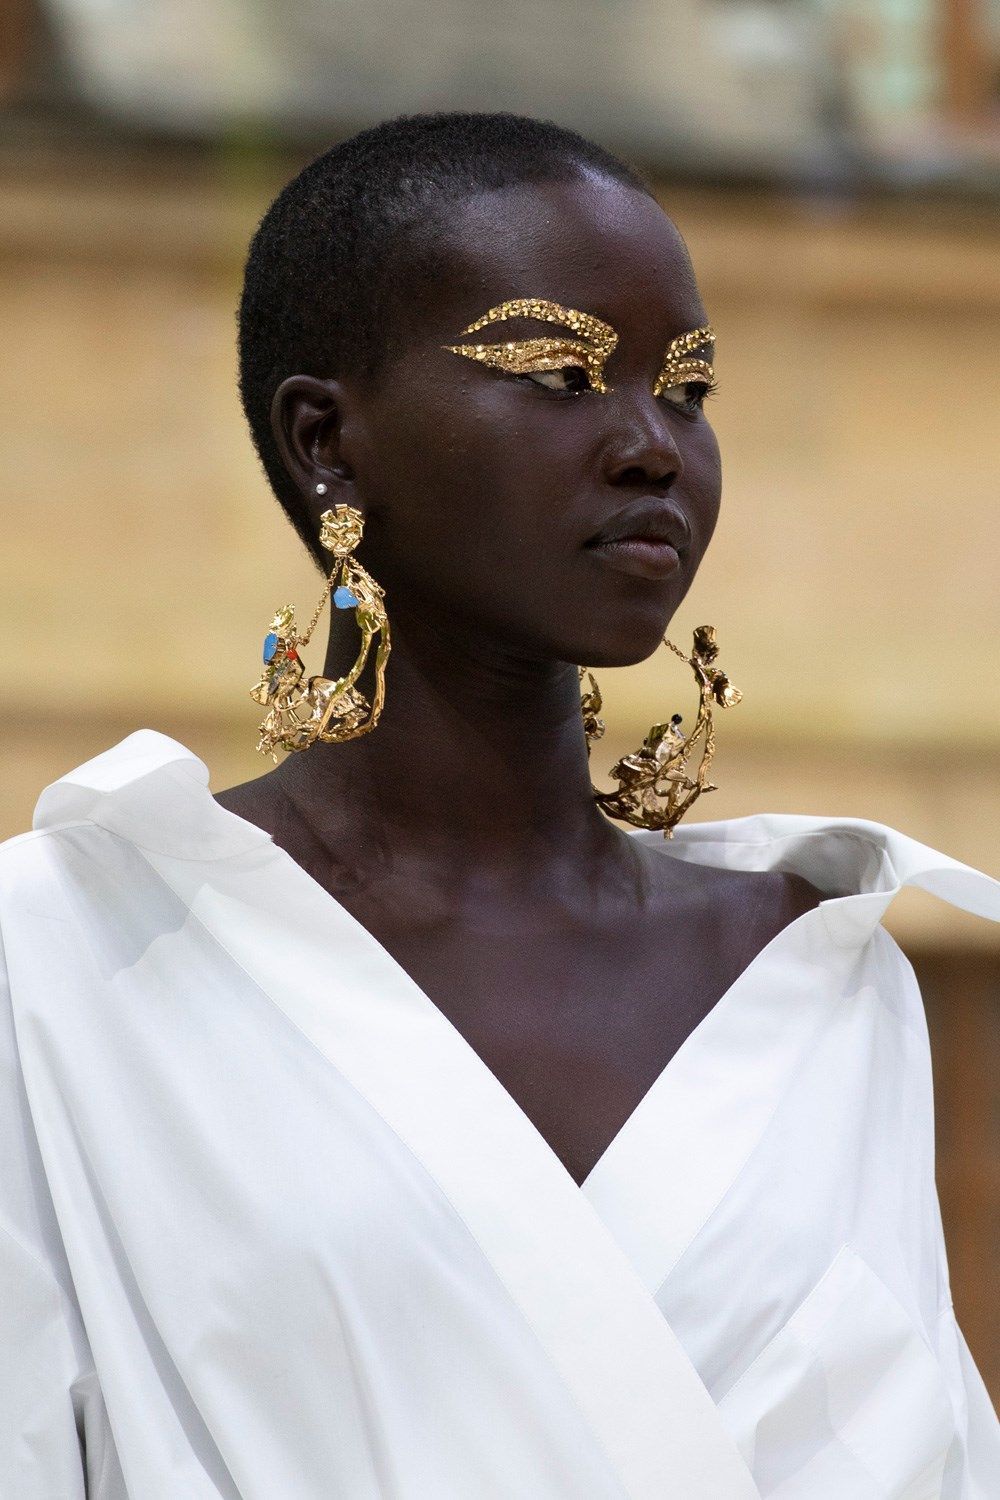 Best 100 Jewelry Of Spring 2020 RTW Fashion Shows | The Impression - Best 100 Jewelry Of Spring 2020 RTW Fashion Shows | The Impression -   16 beauty Fashion show ideas